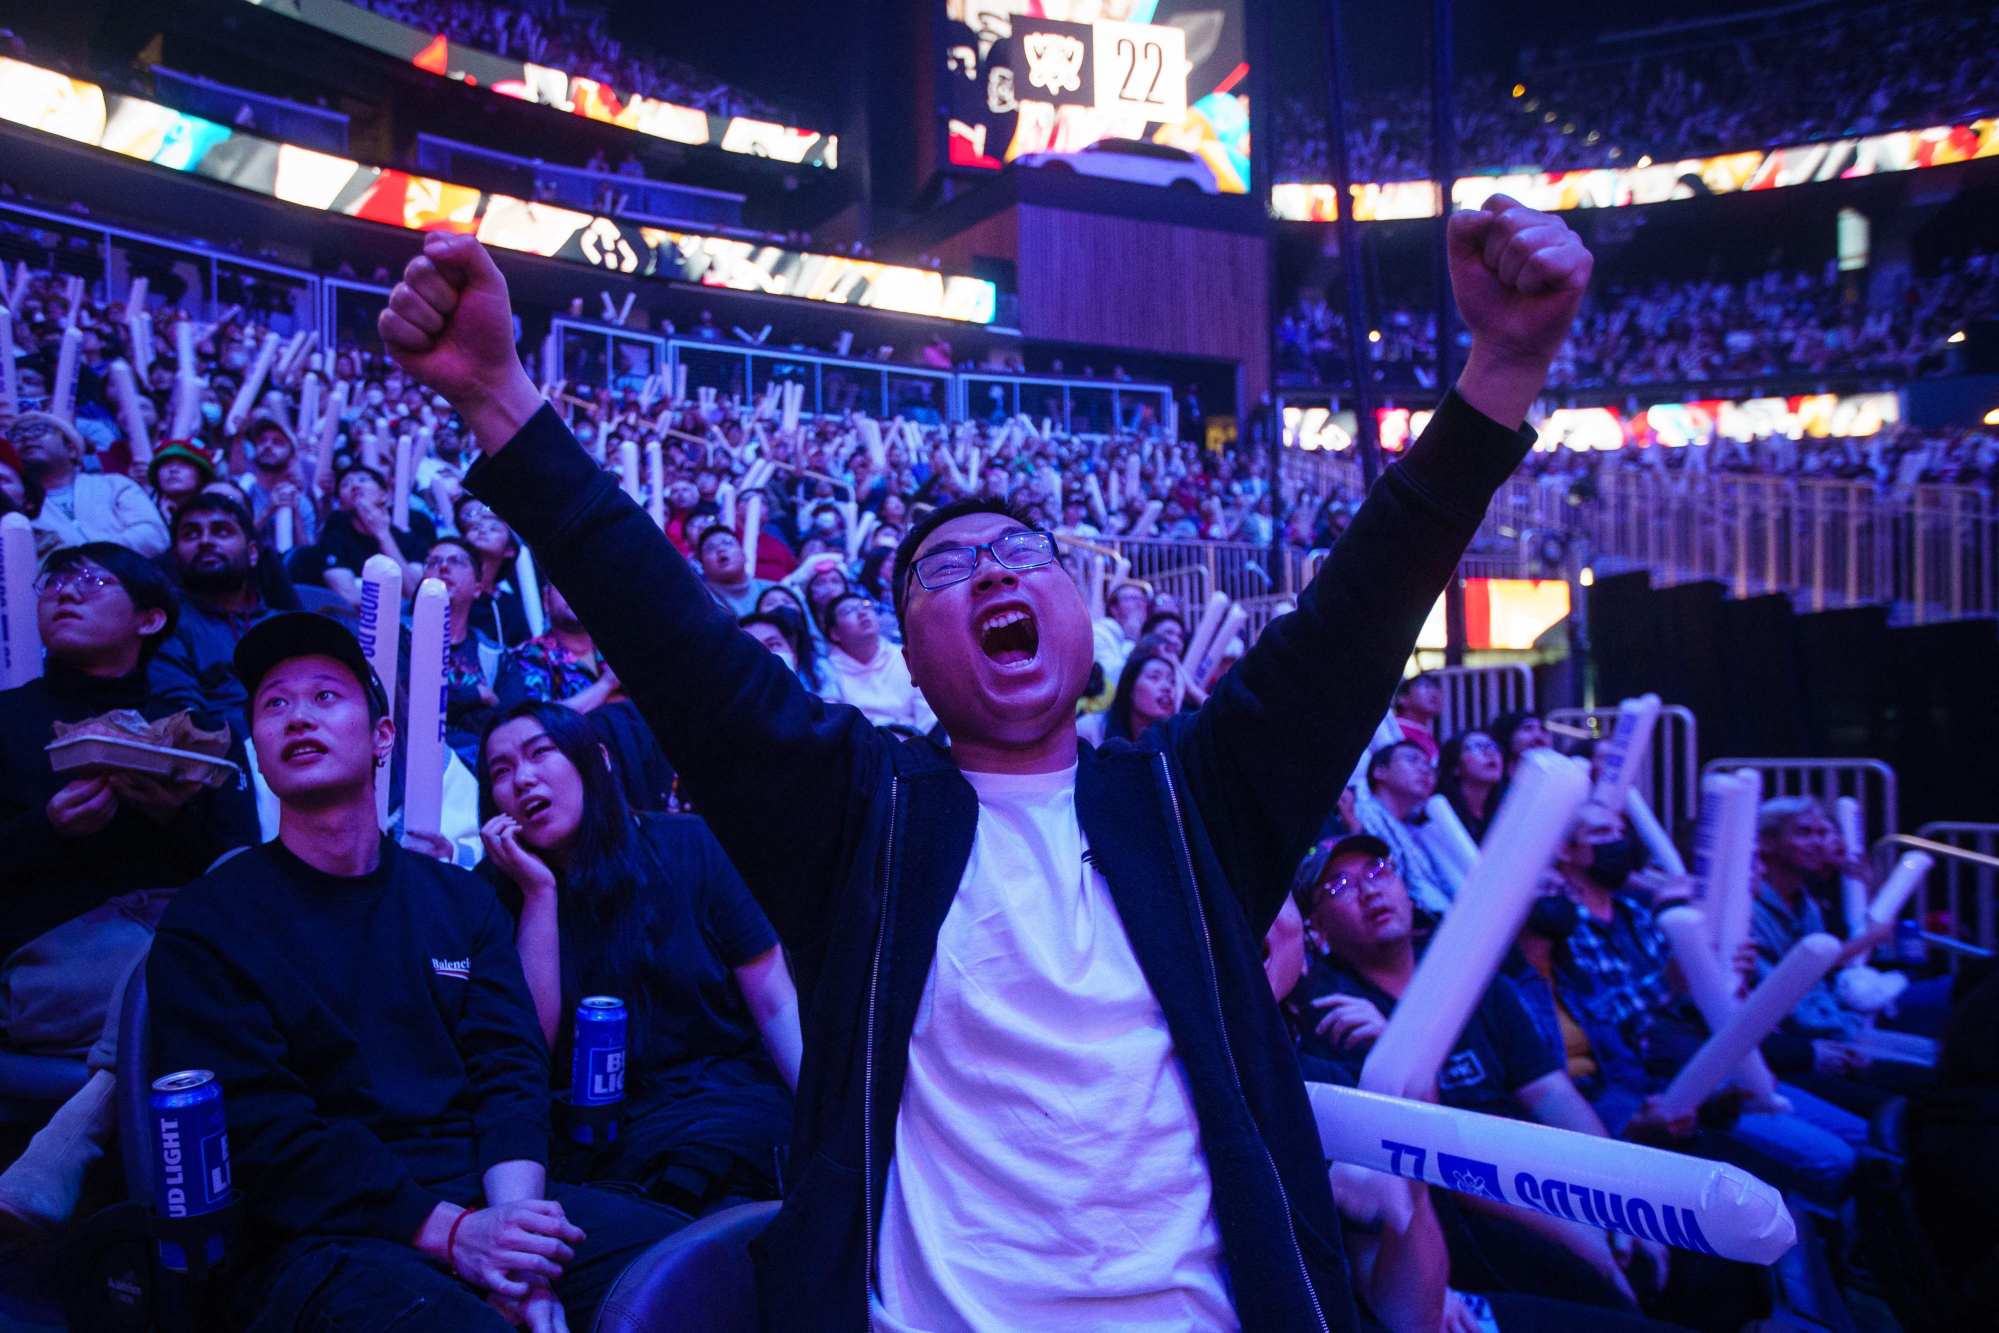 Attendees cheer during the League of Legends World Championship semi-final match between JD Gaming and T1 at State Farm Arena in Atlanta, Georgia on October 29, 2022. Photo: Agence France-Presse